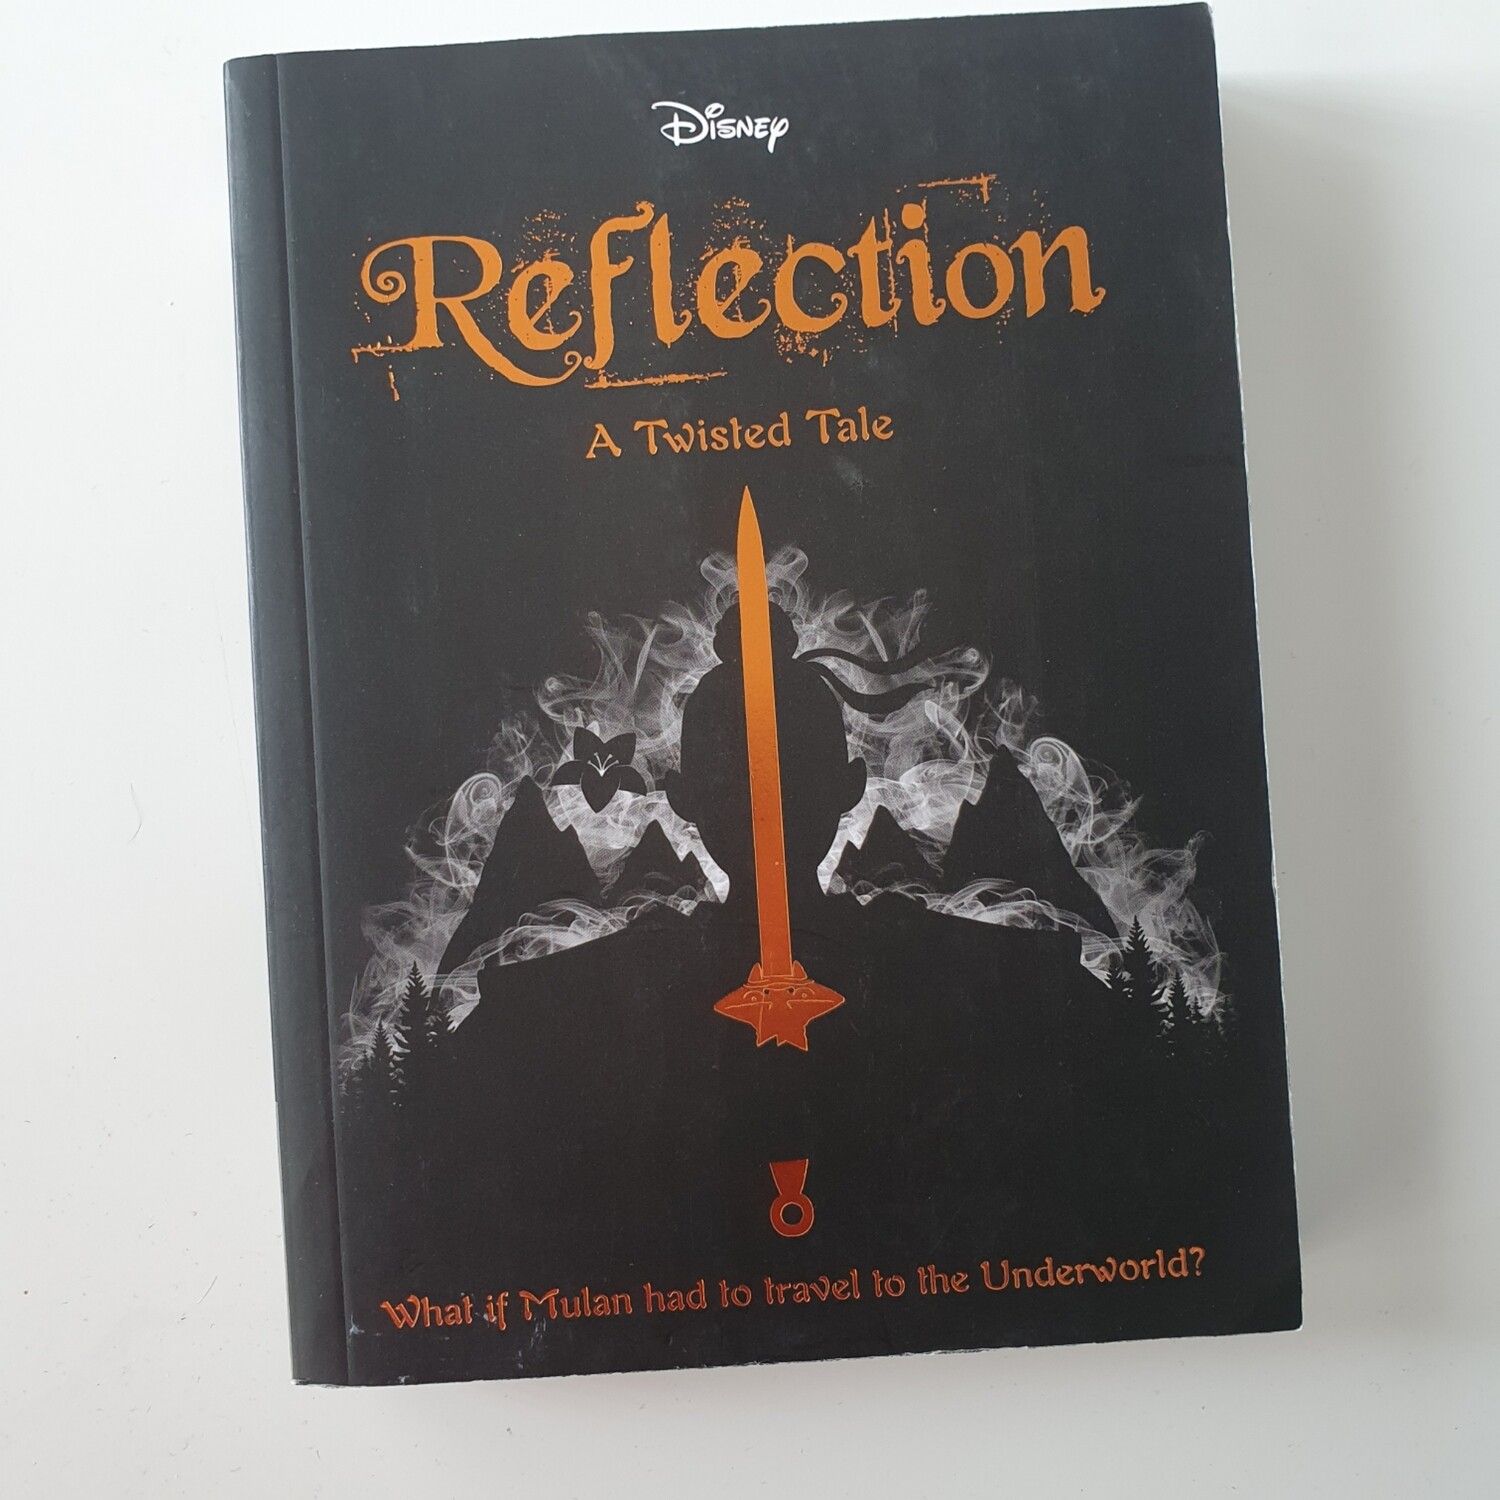 Mulan : Reflection - Twisted Tales , Disney Notebook - made from a paperback book, comes with book corners